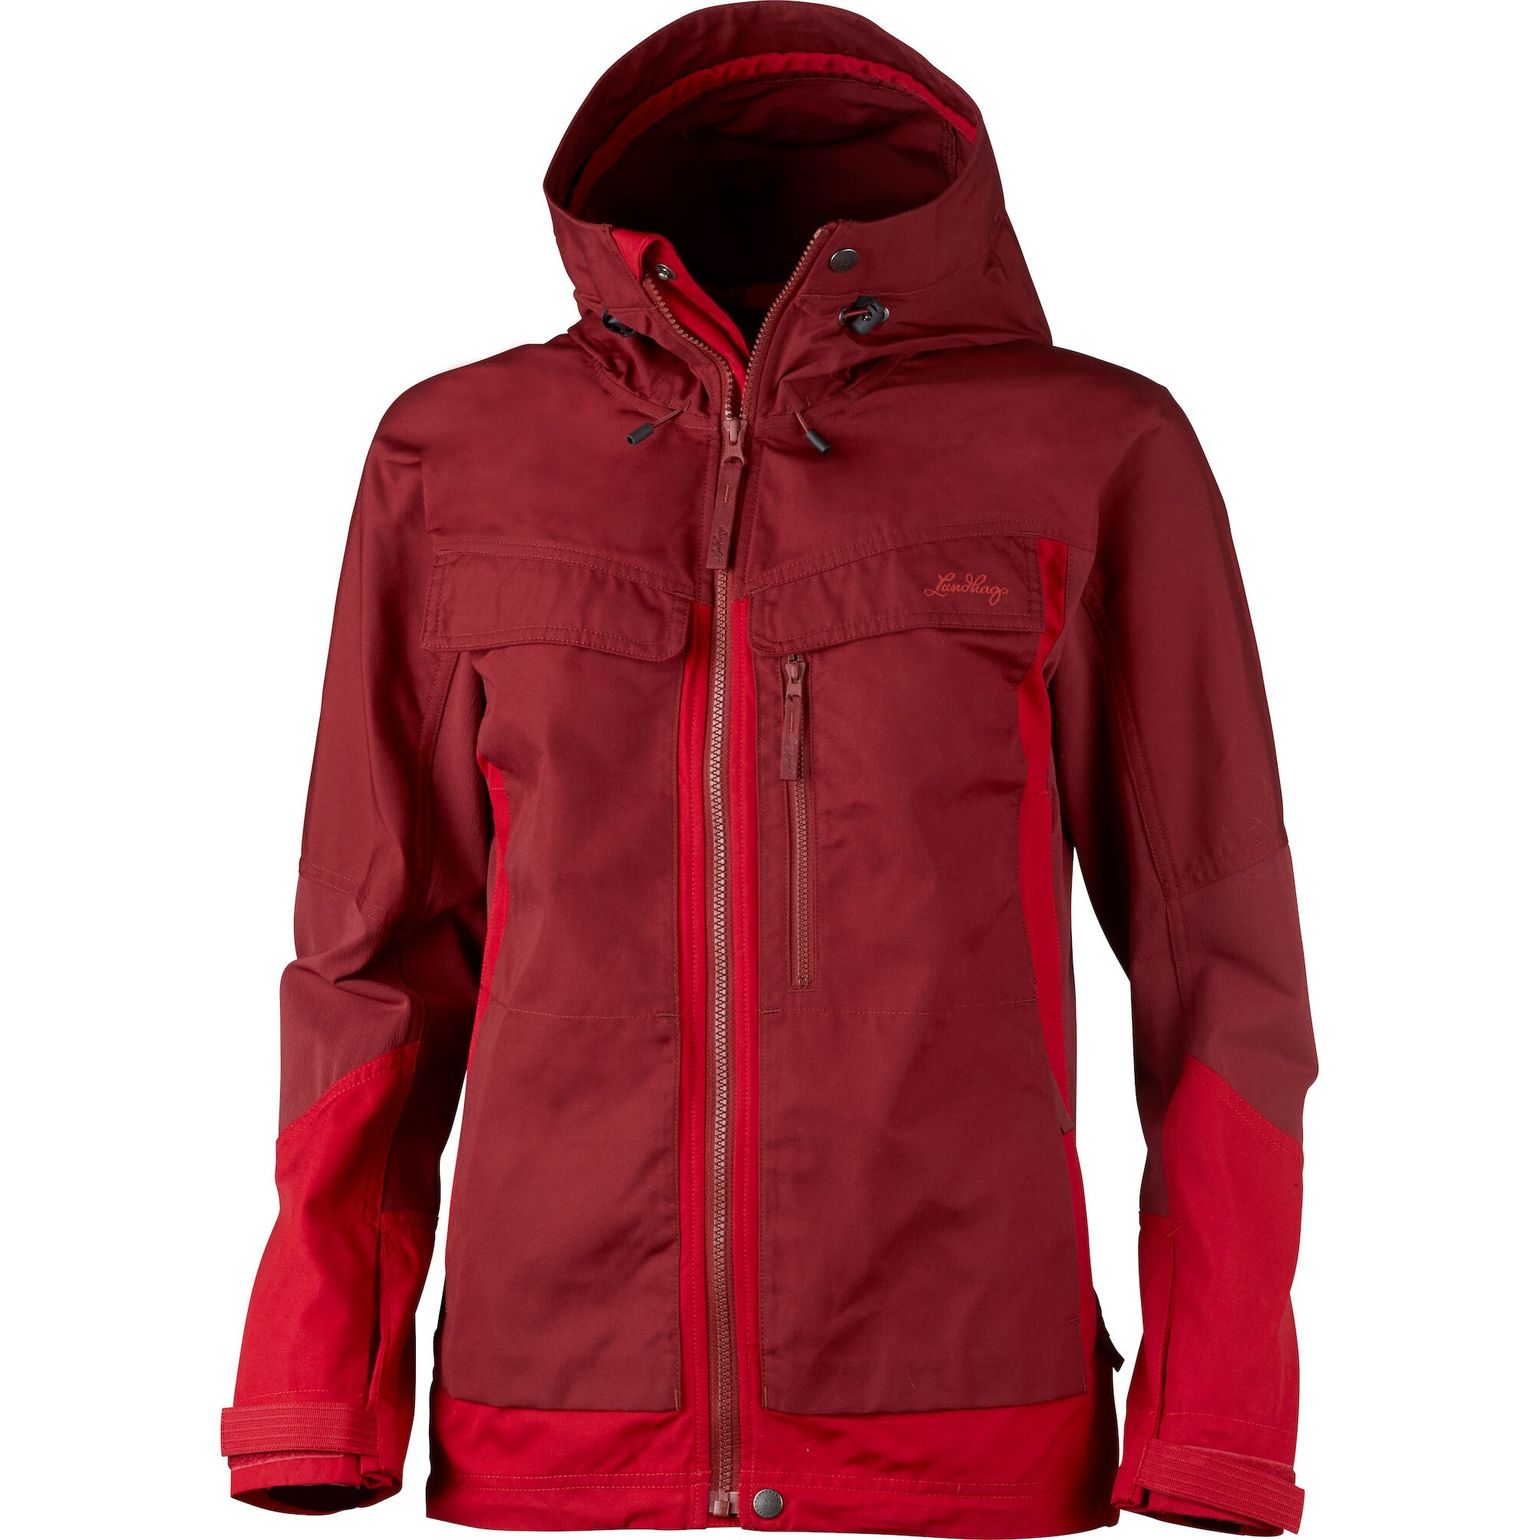 Lundhags Women's Authentic Jacket Red/Dark Red